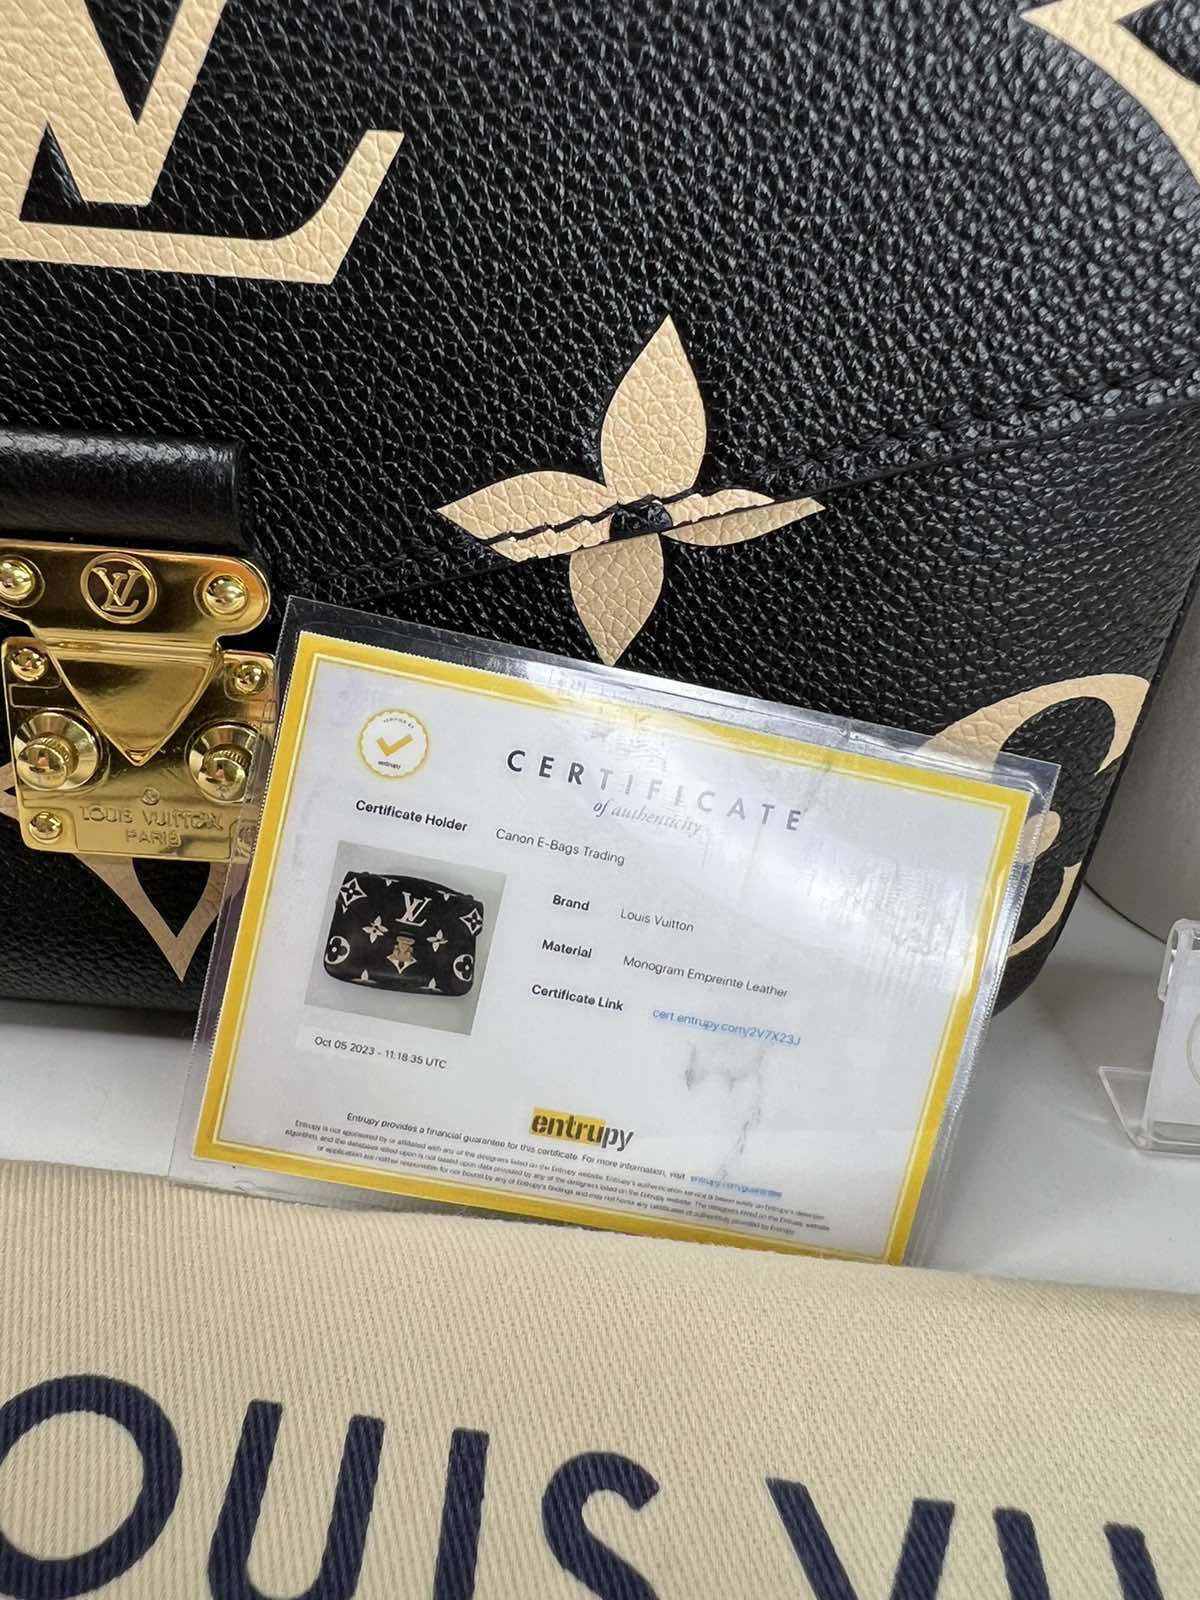 louis vuitton certificate of authenticity